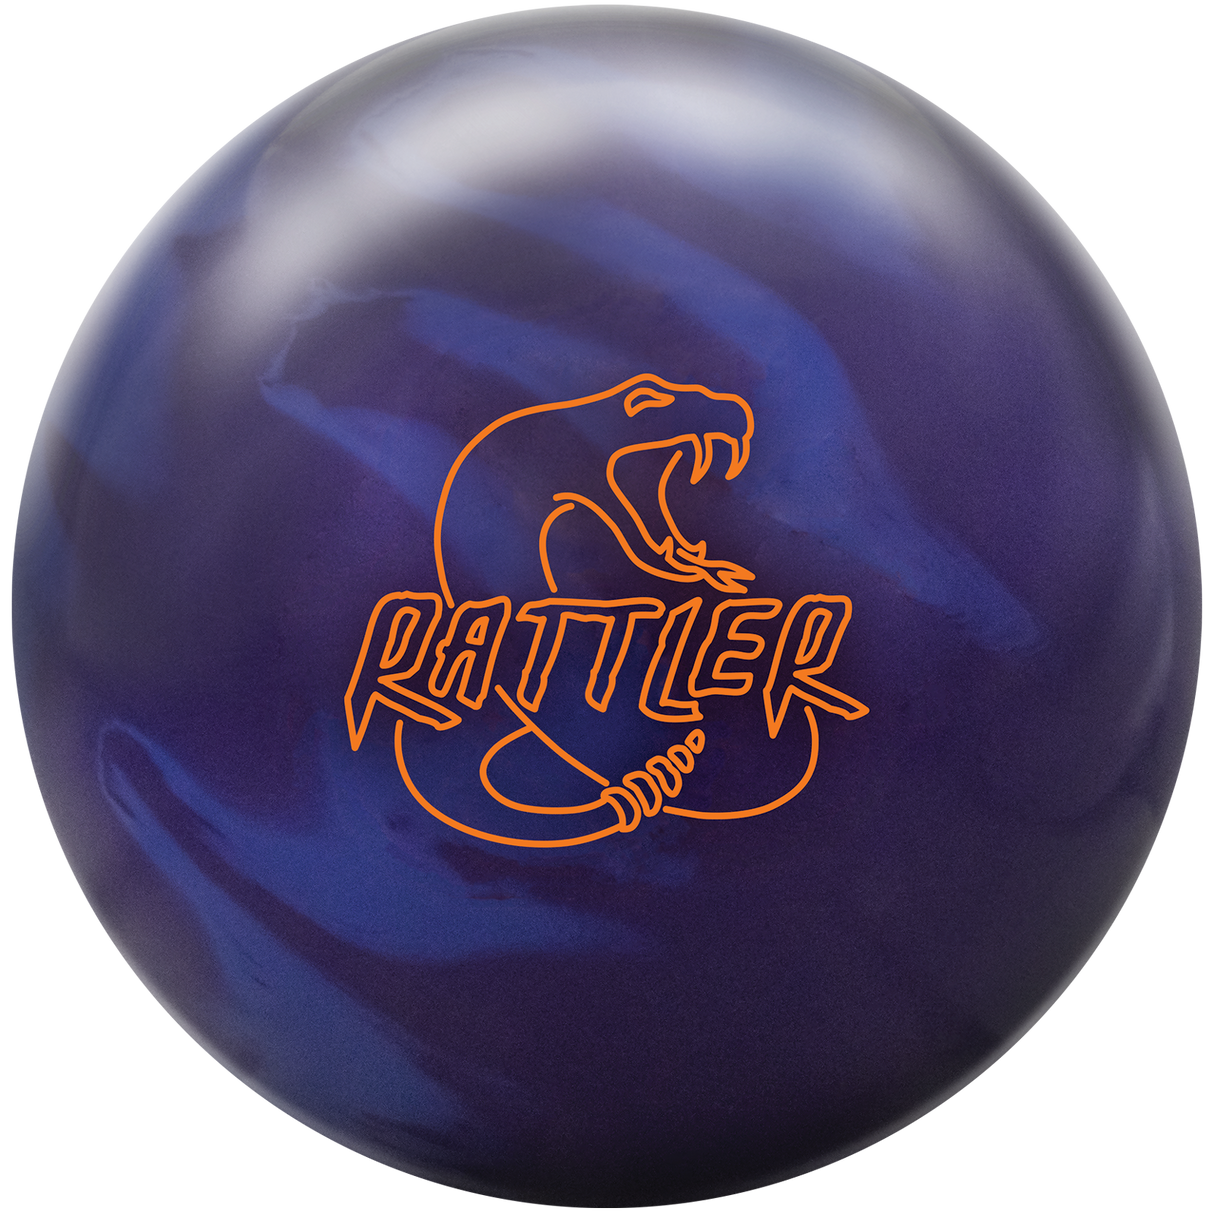 The Rattler is a new addition to our popular Reliable performance category, following in the footsteps of the Bigfoot; the Rattler is strong and continuous like the Bigfoot but is more angular with more backend motion. Inside Bowling Online Pro Shop best prices online. Free shipping on orders over $75.